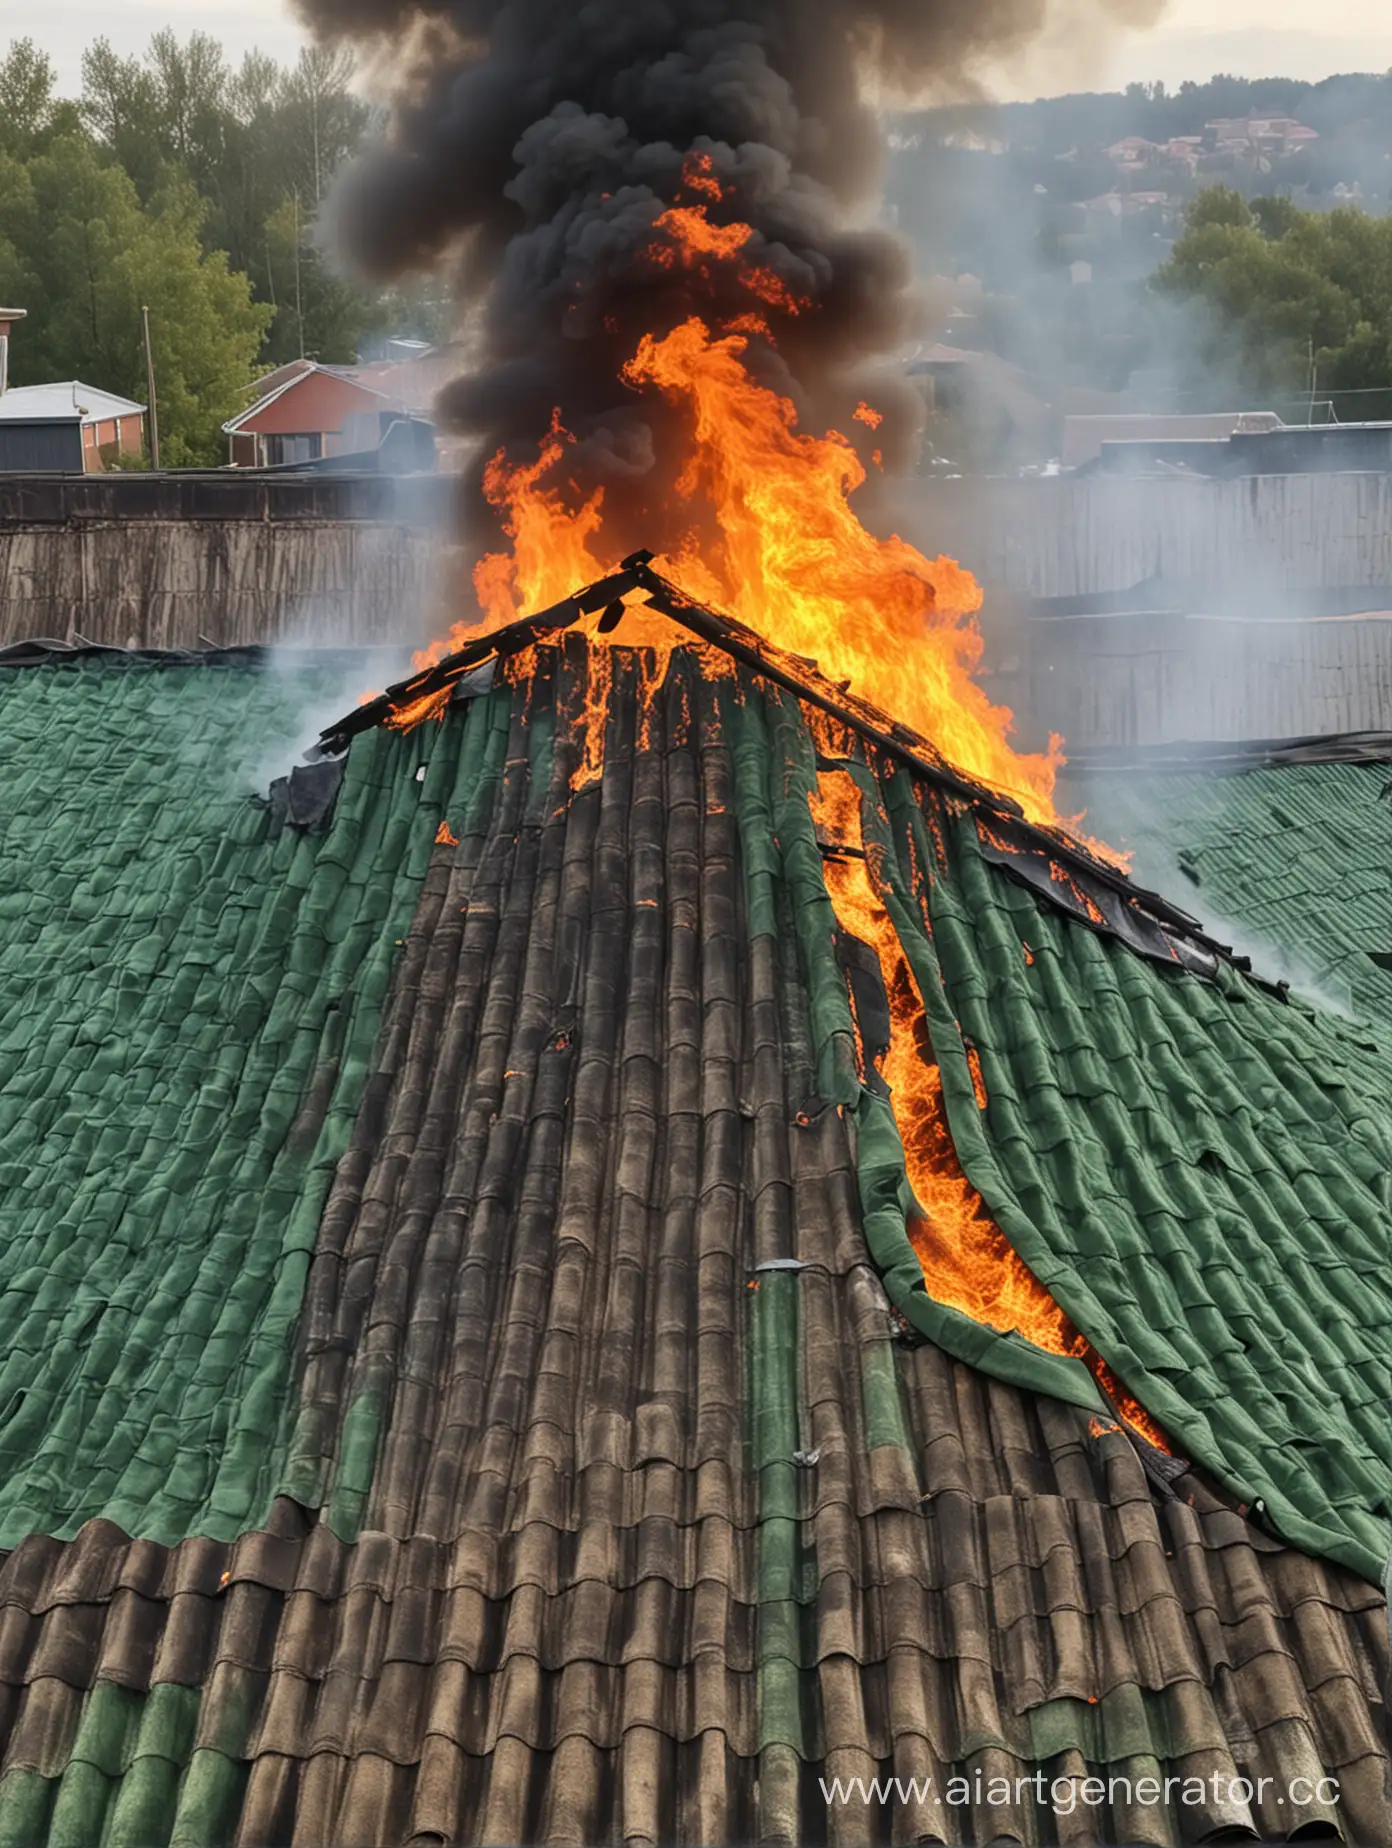 Roof-on-Fire-Green-Profiled-Sheeting-Ignited